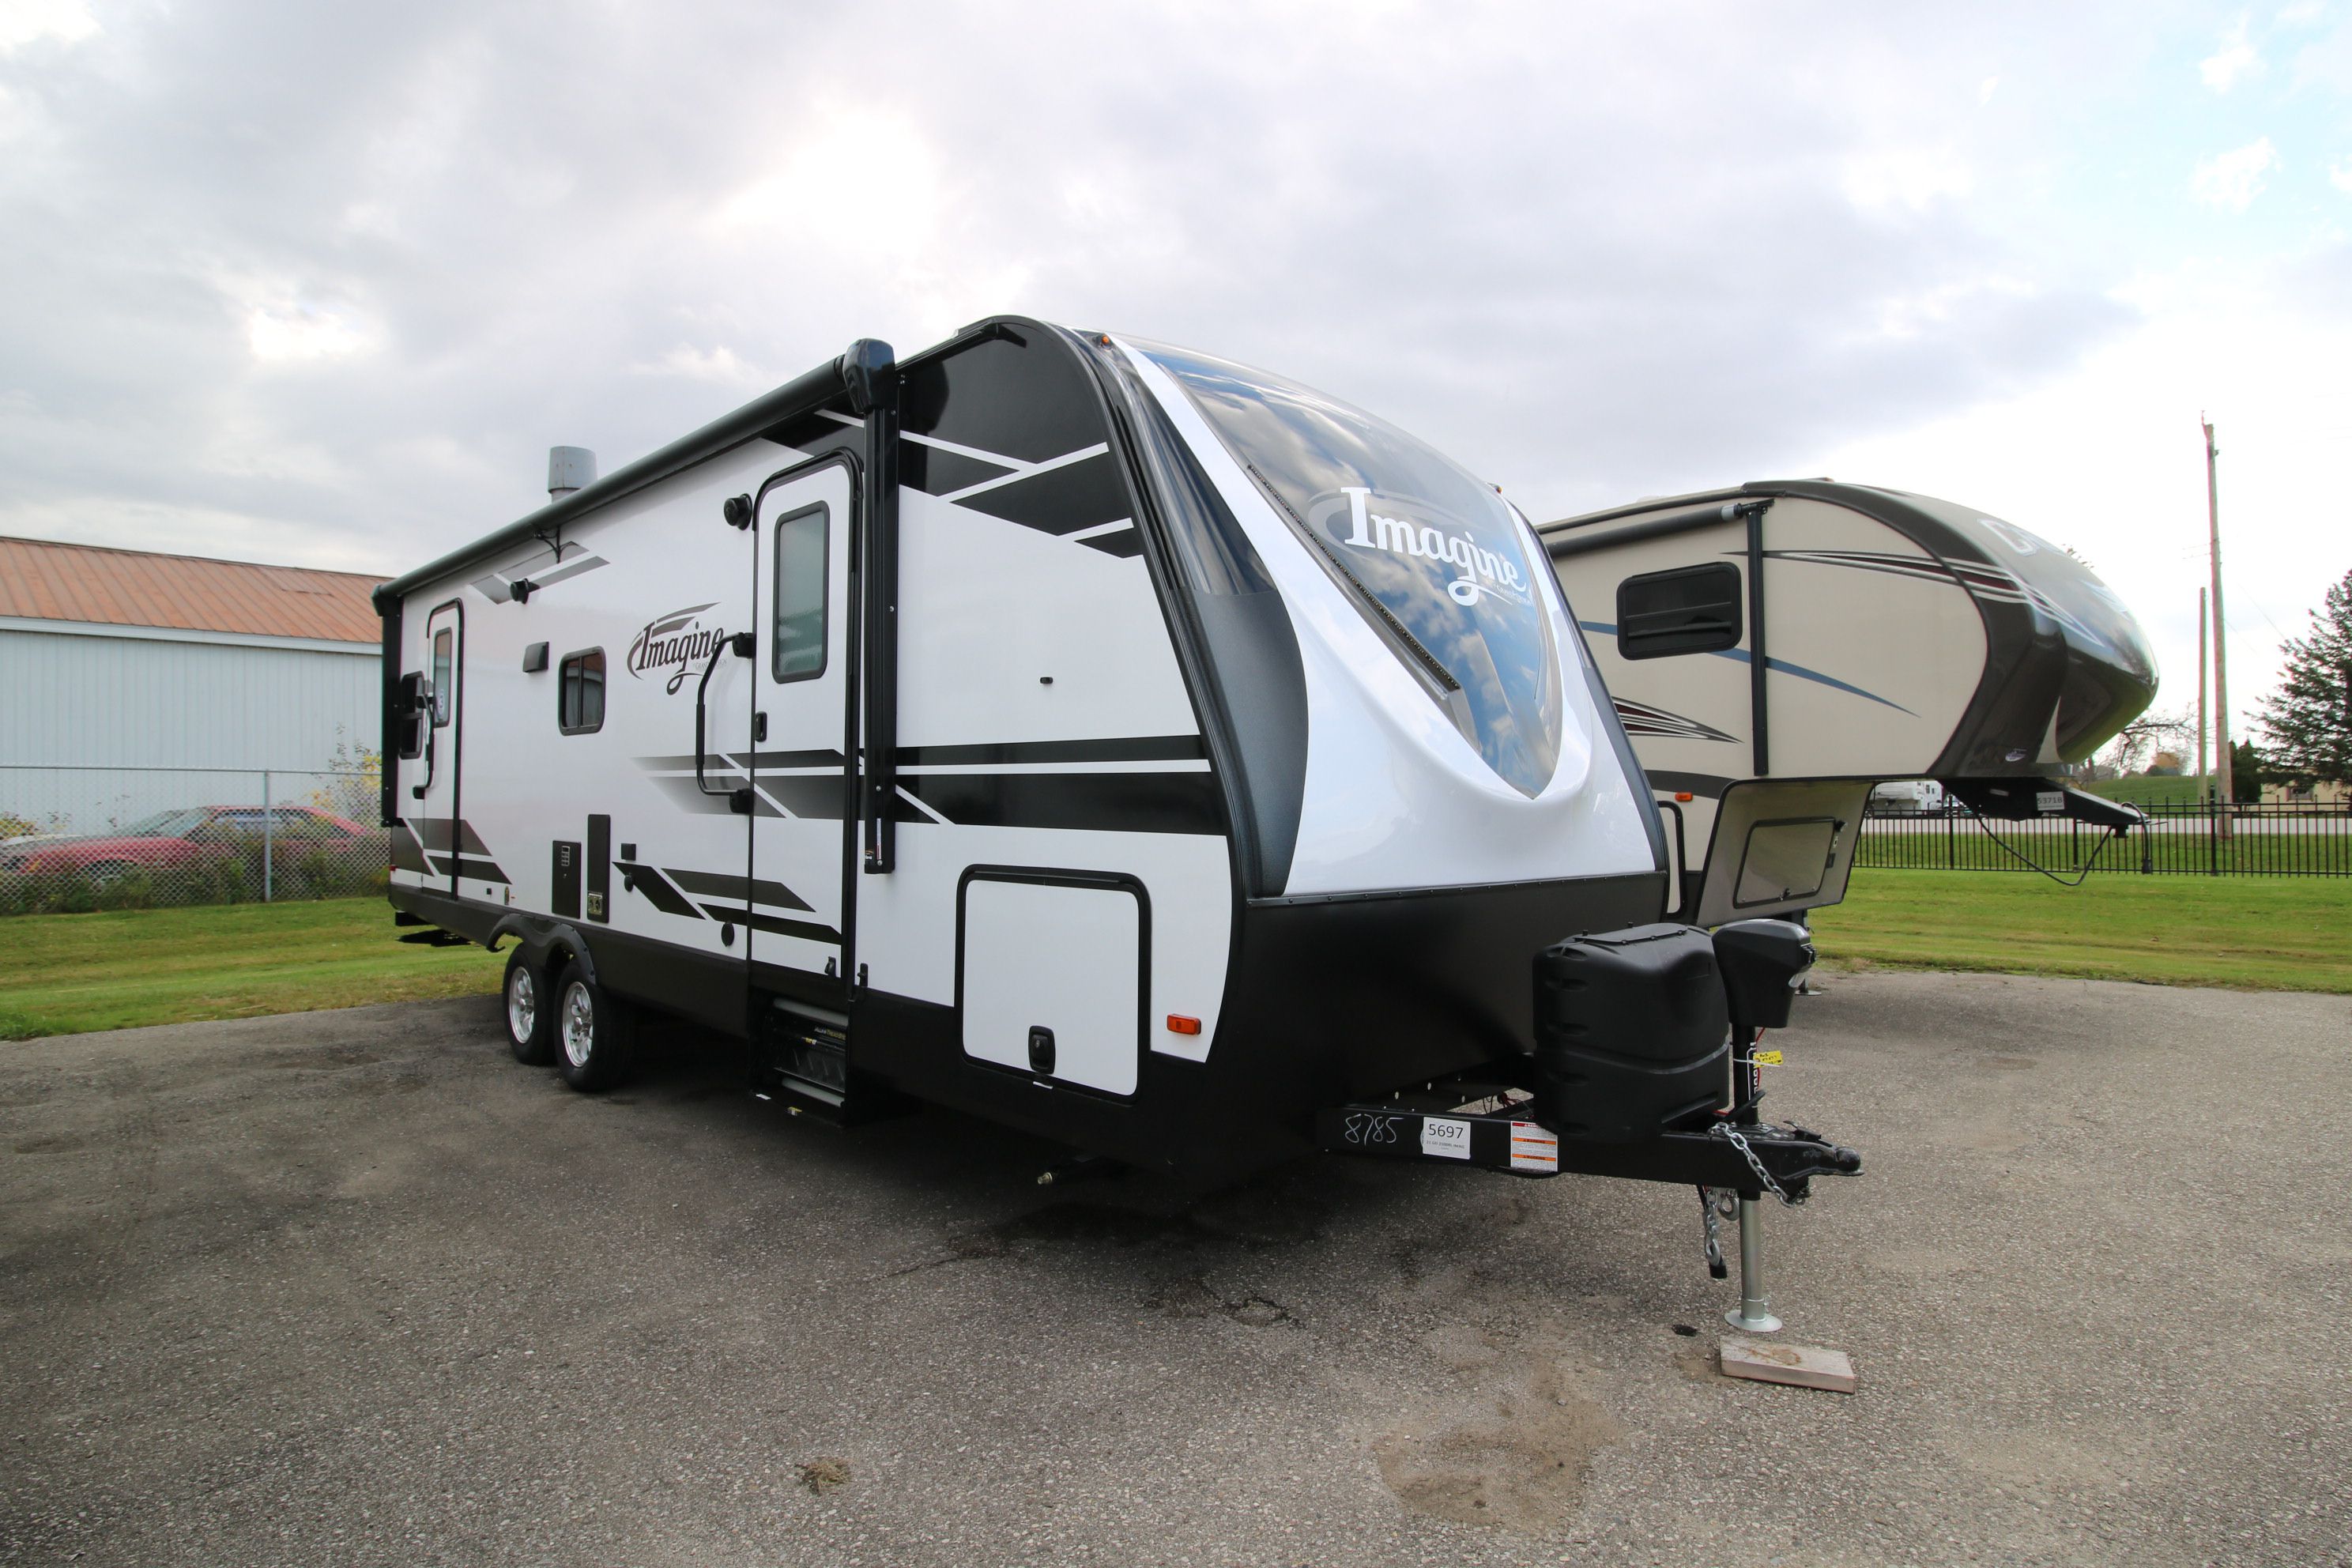 20 25 foot travel trailers